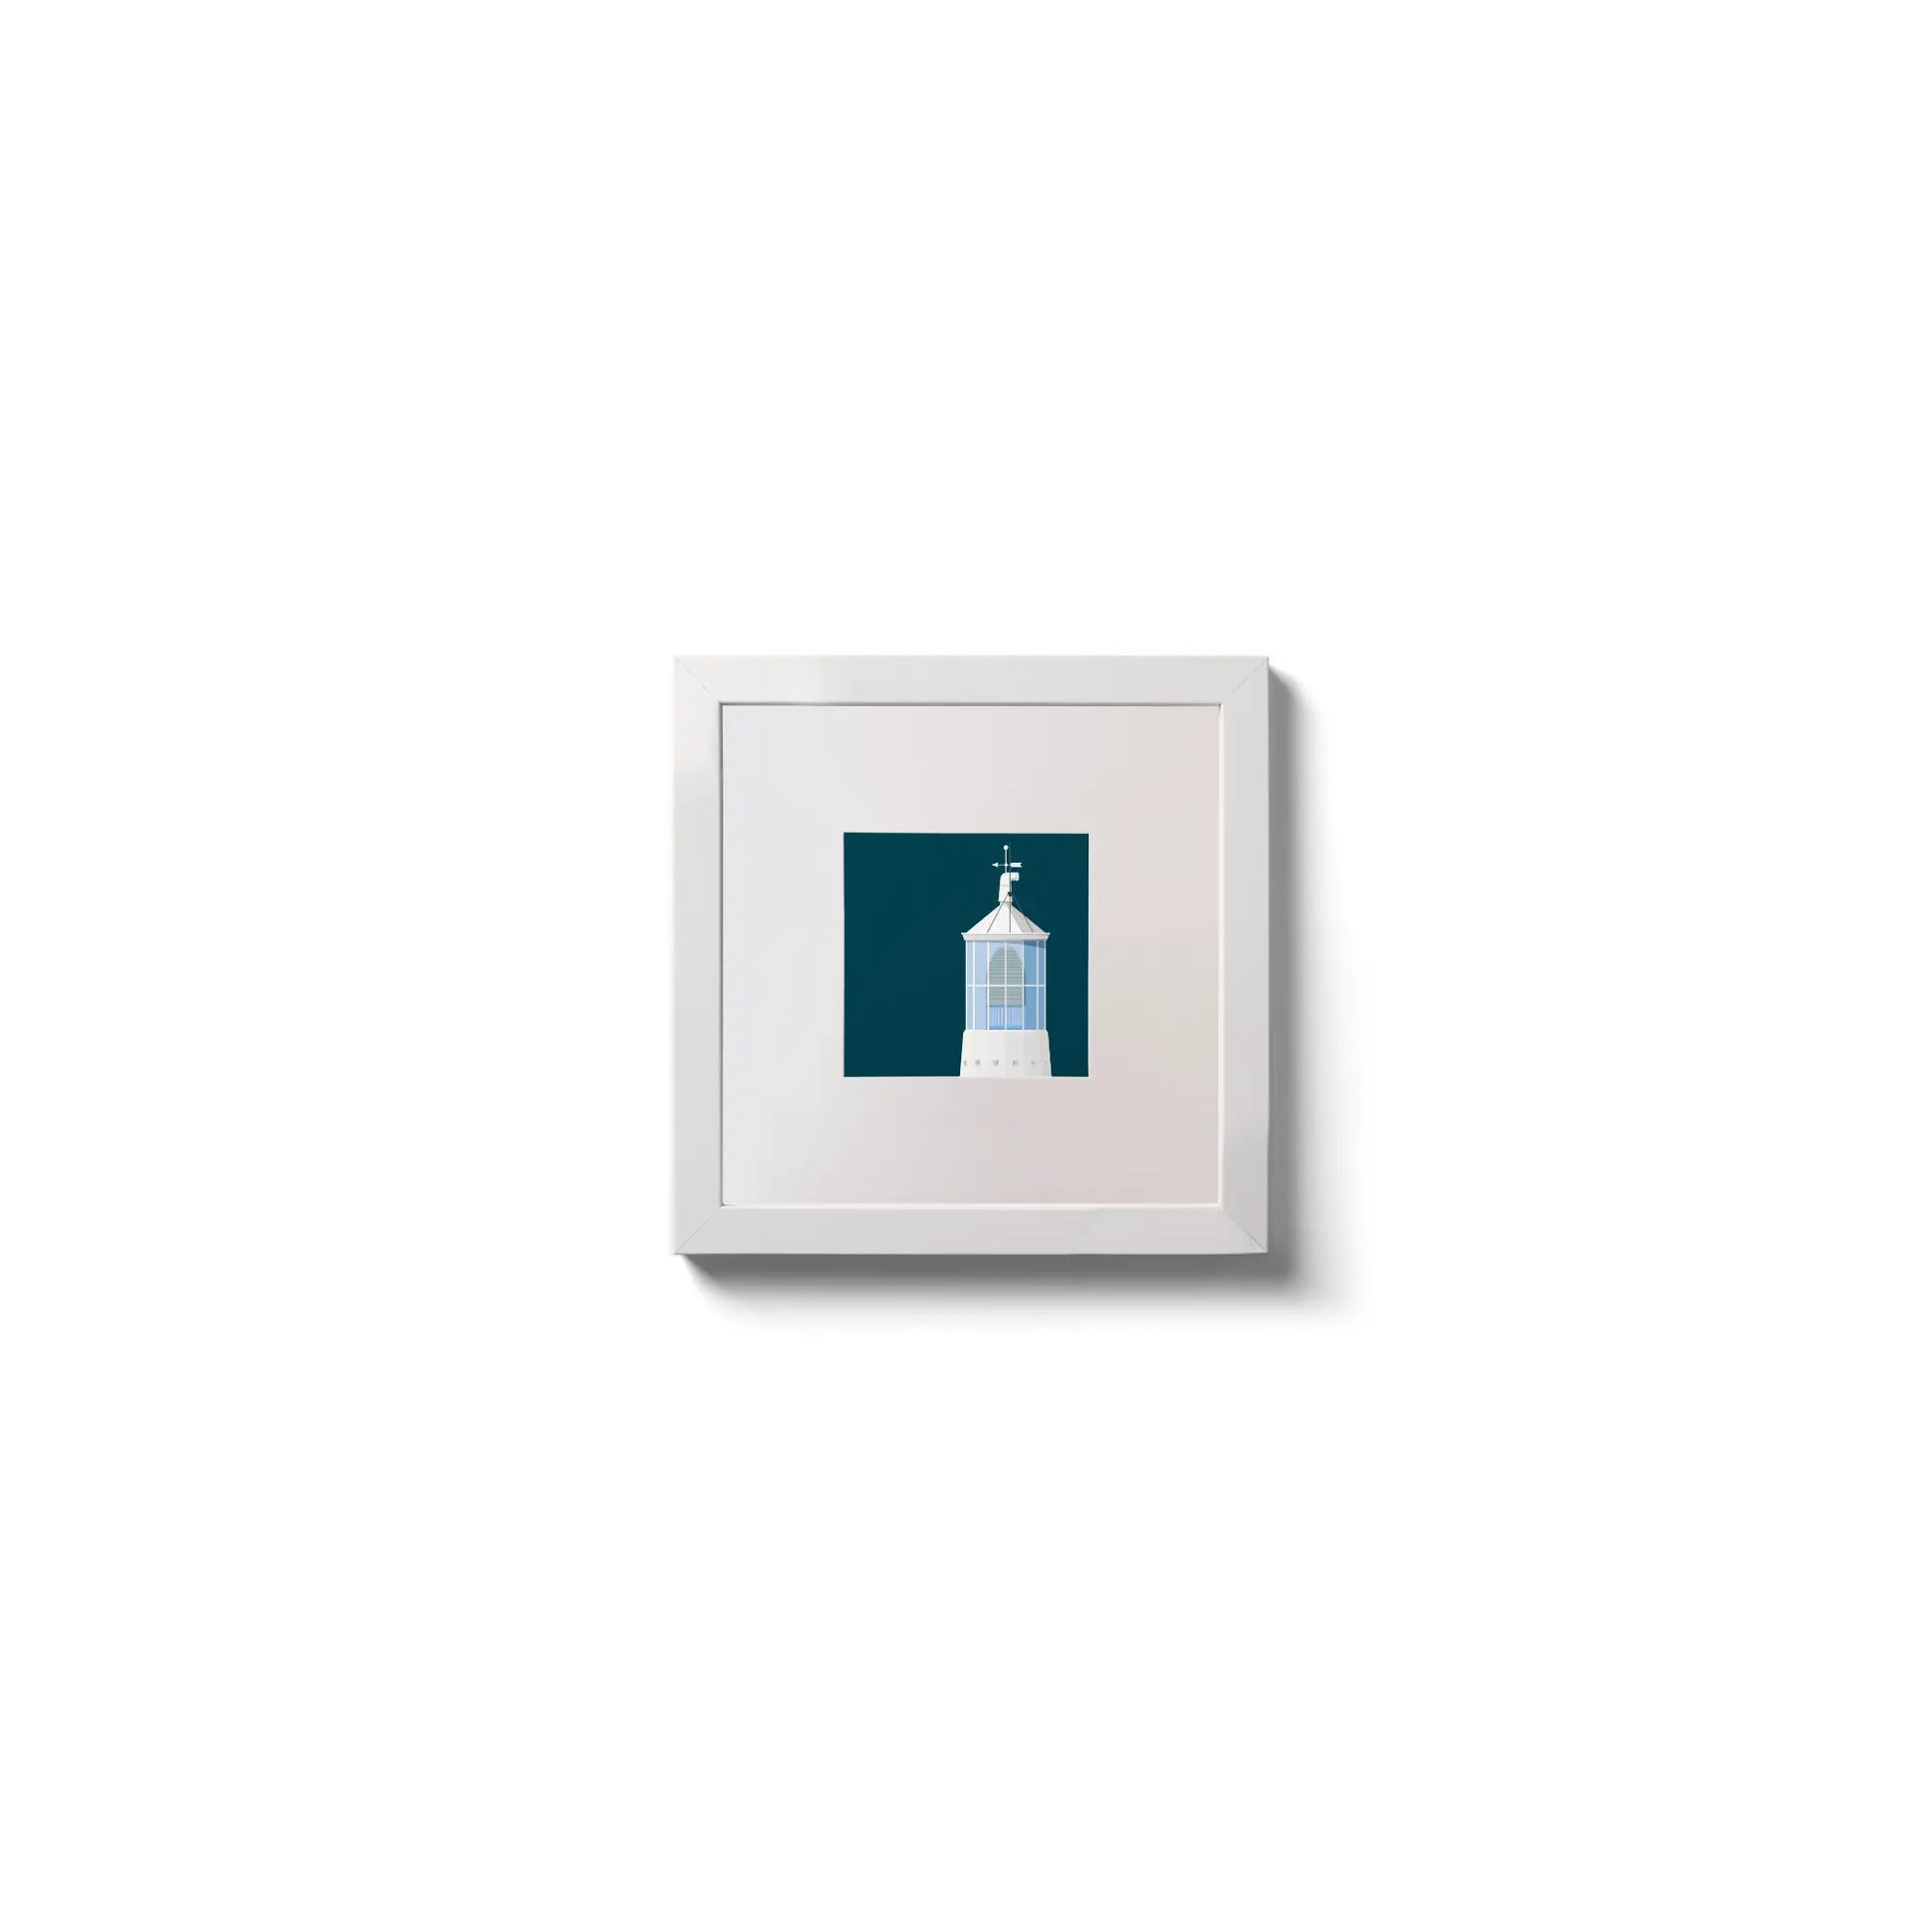 Contemporary wall art Dunree lighthouse on a midnight blue background,  in a white square frame measuring 10x10cm.